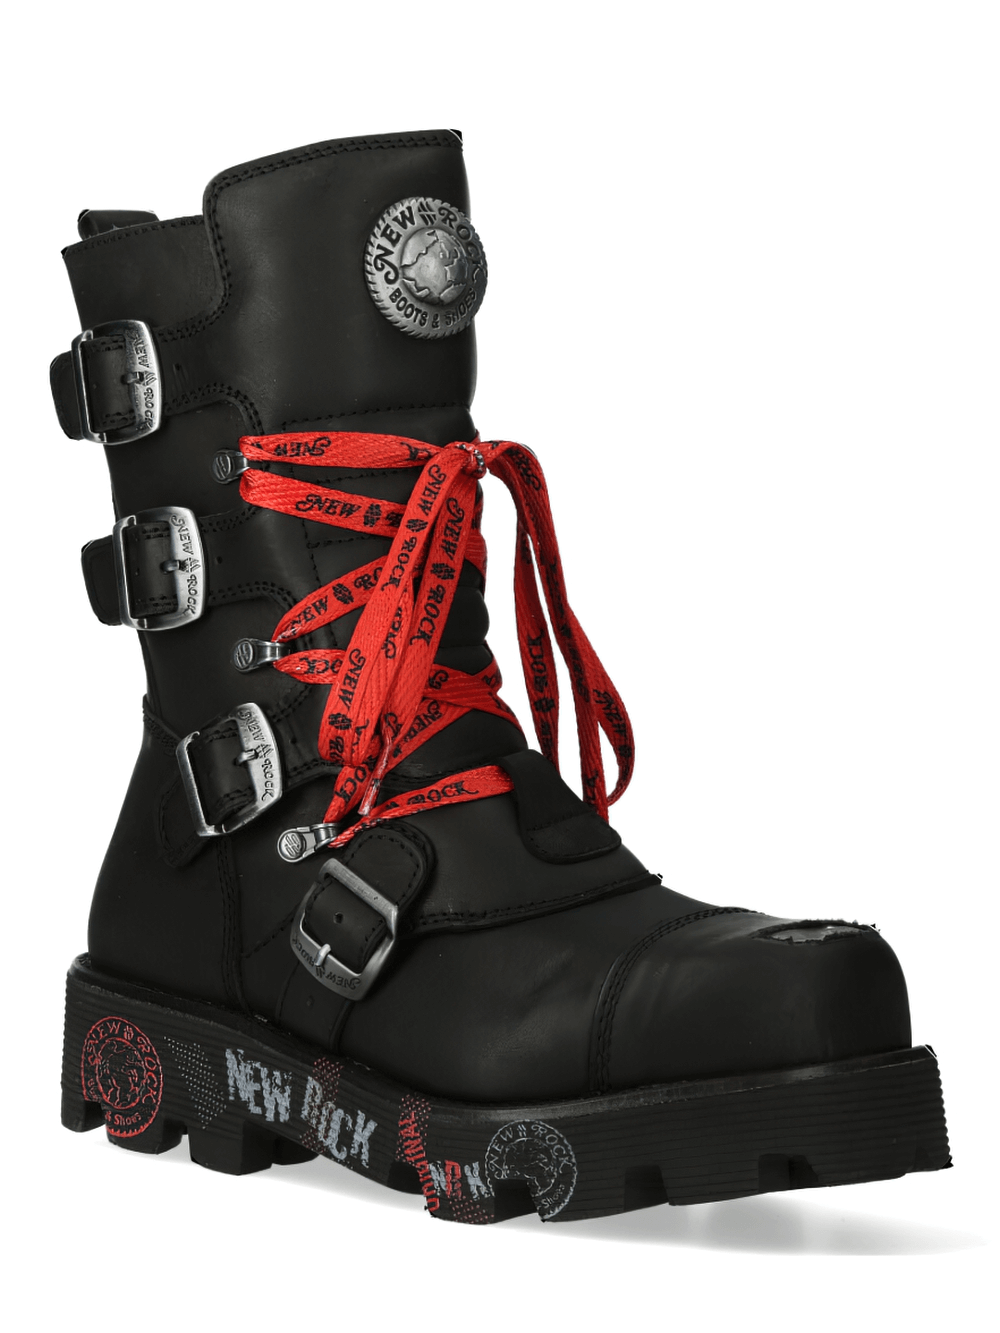 NEW ROCK Black Ranger Boots with Red Laces for Rock Style